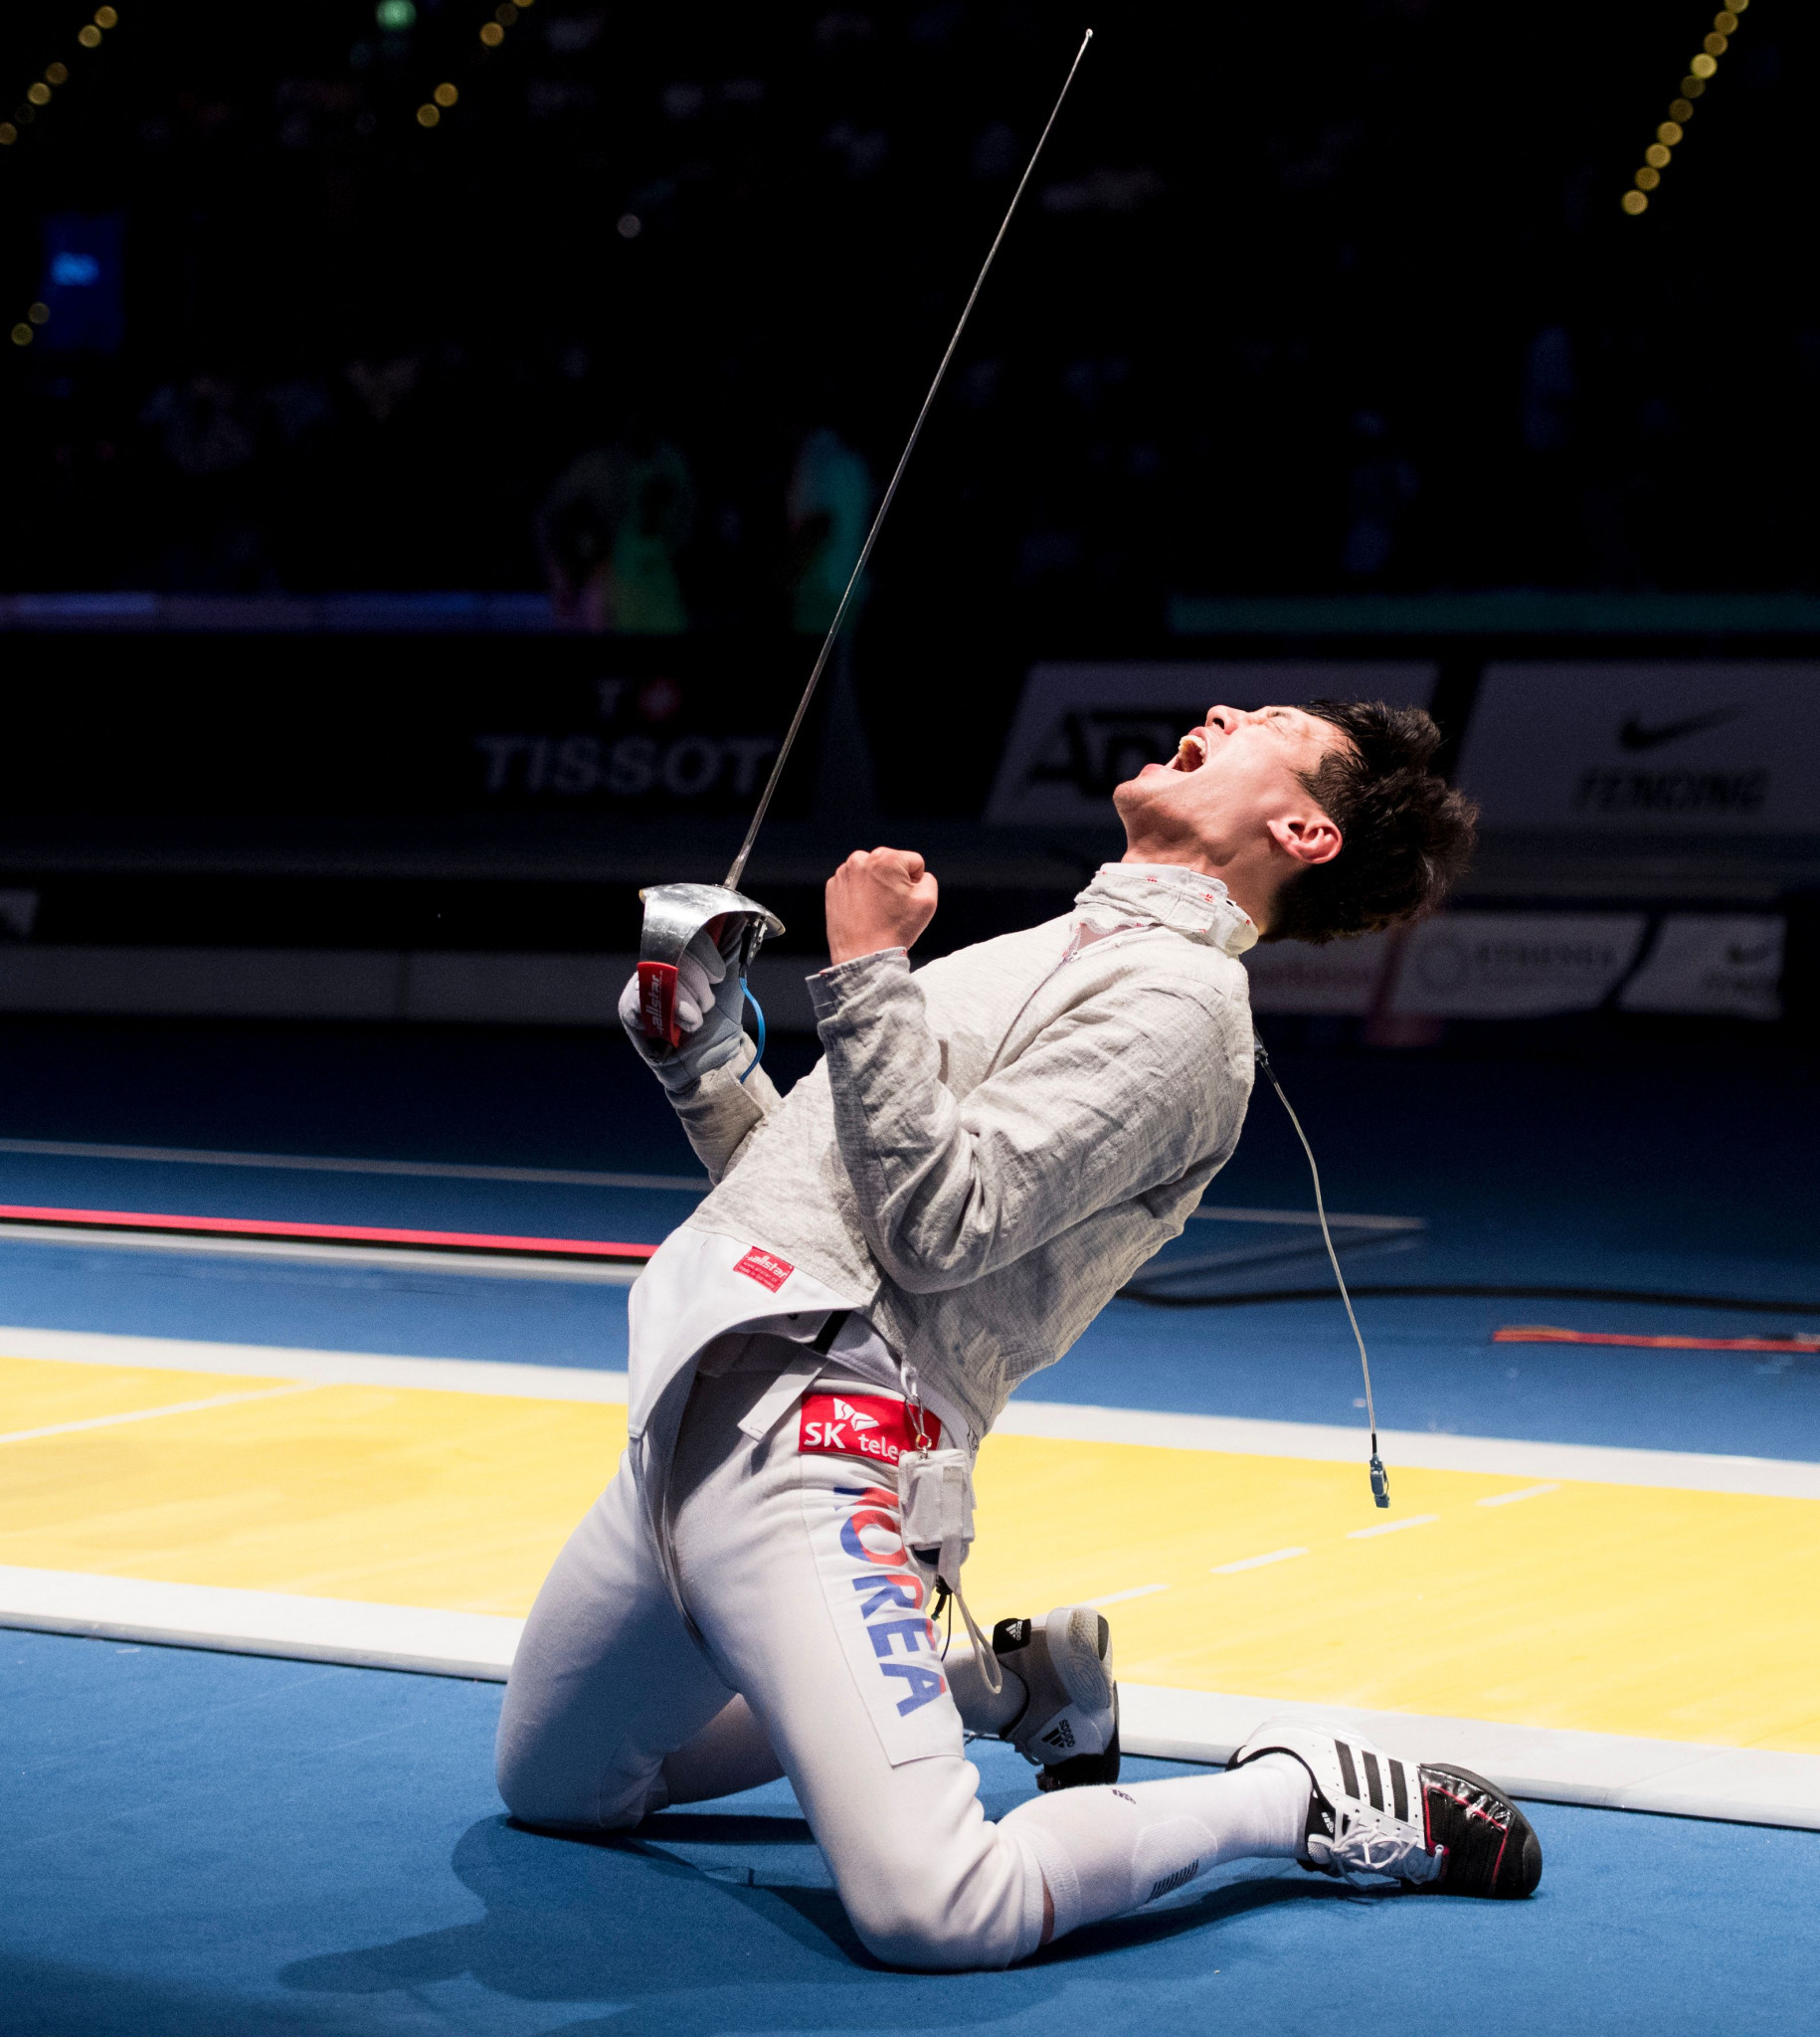 Gu leads star-studded field for FIE Sabre Grand Prix in Moscow